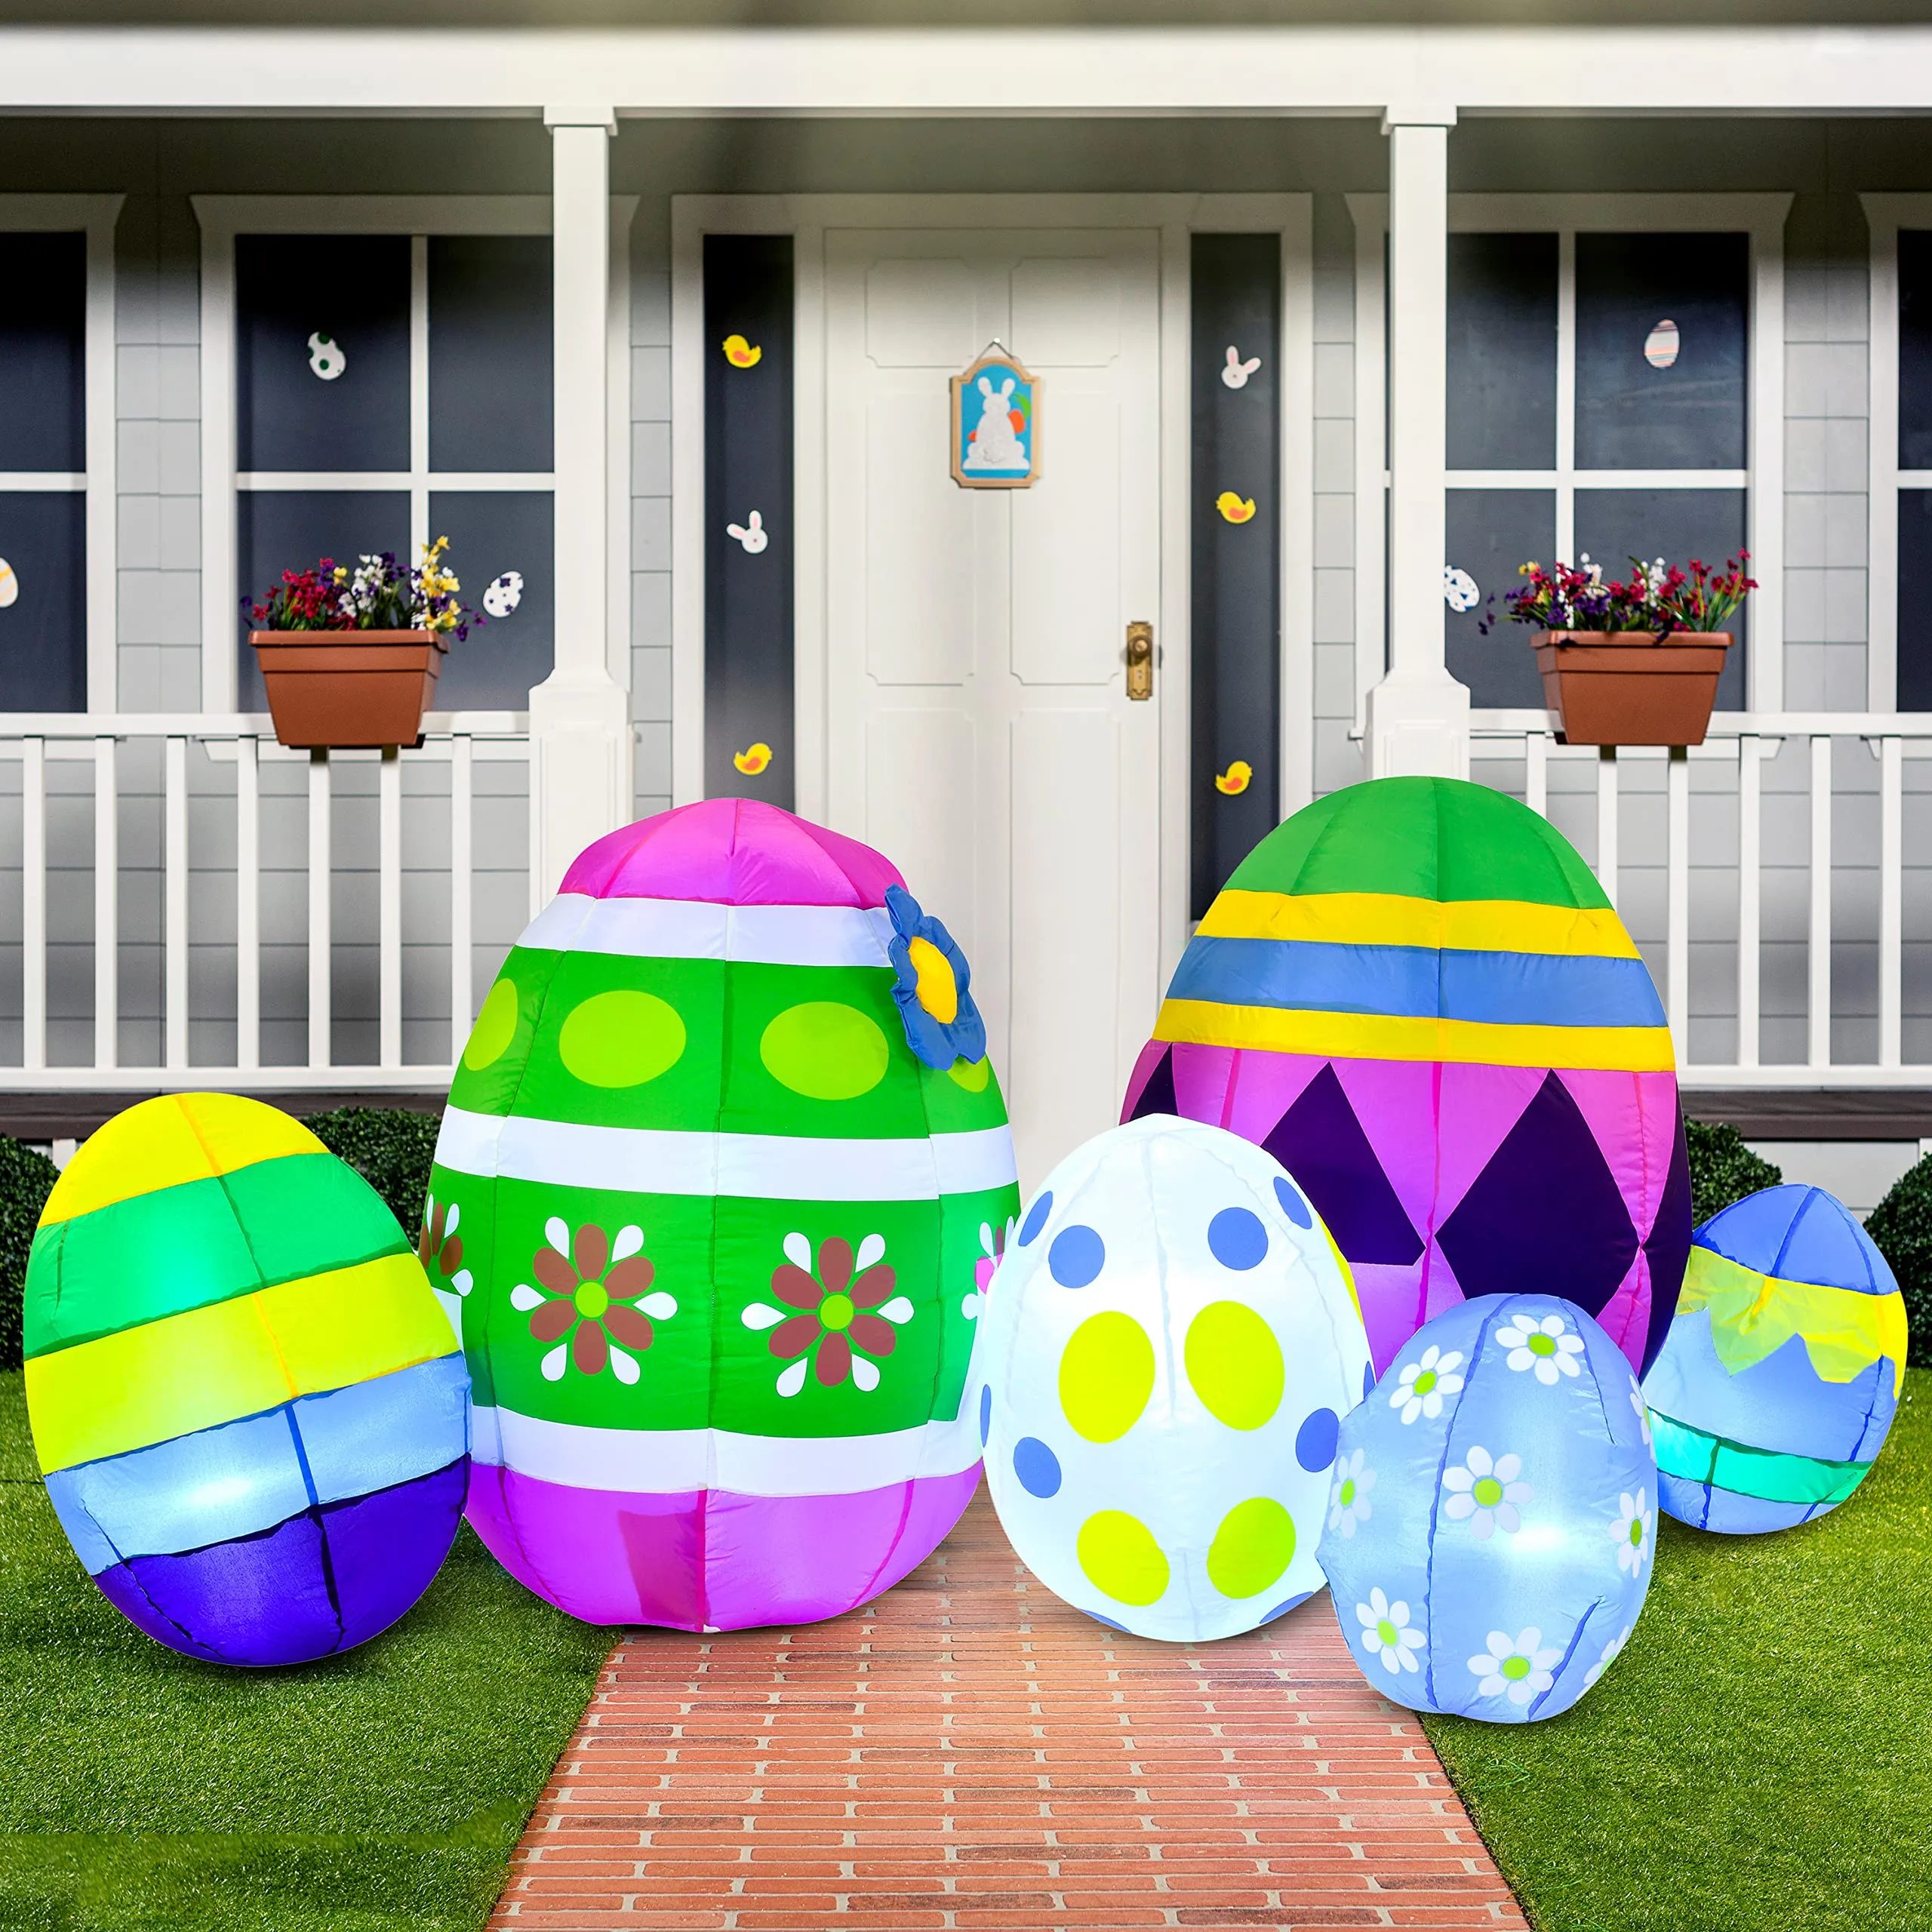 You are currently viewing Can you recommend online stores for unique Easter decor pieces?